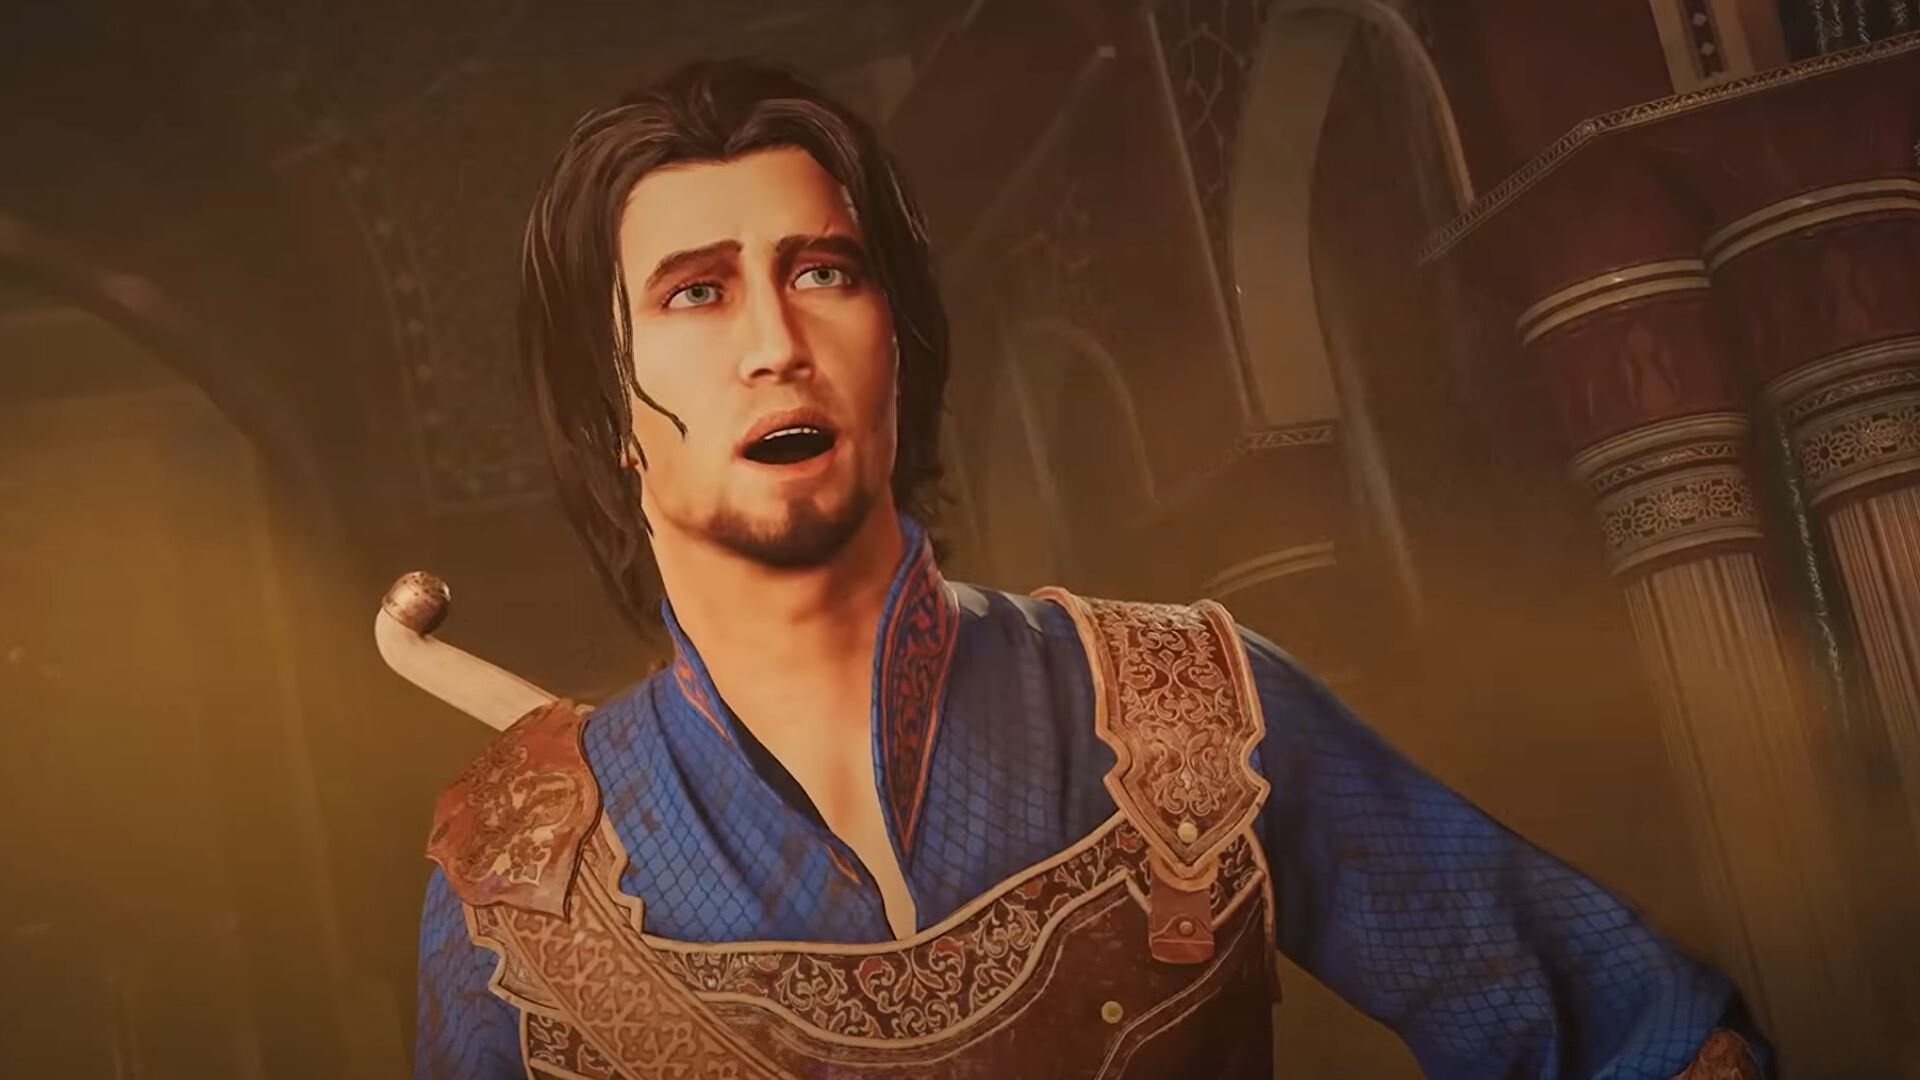 The Prince Of Persia: Sands Of Time remake isn’t cancelled, but pre-orders have been refunded